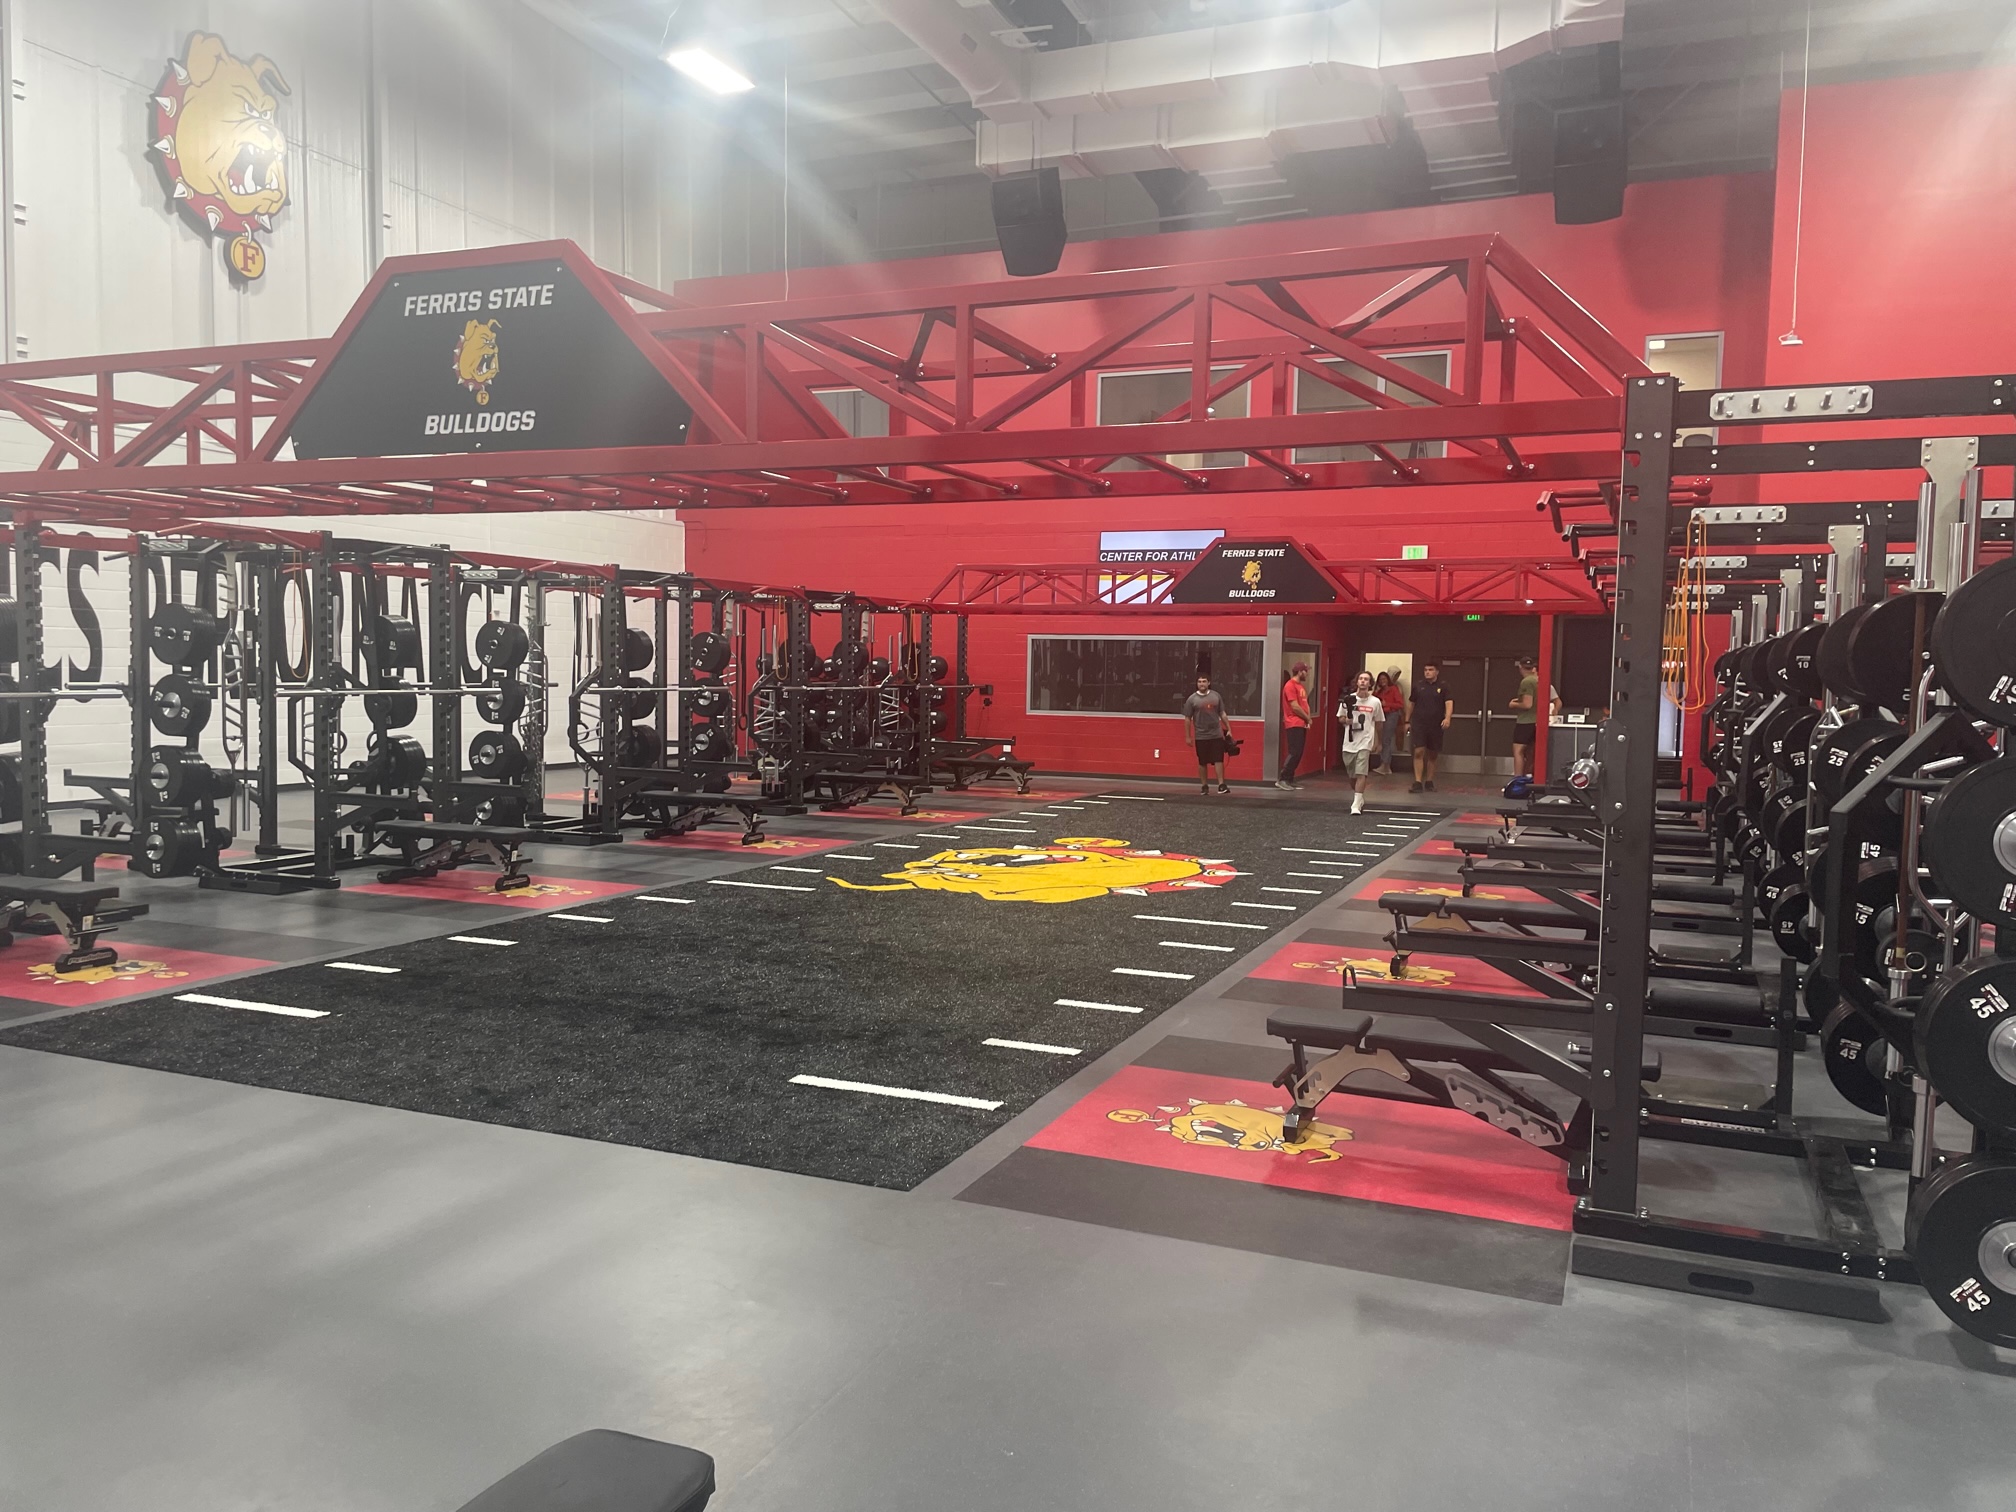 New Ferris State University Center For Athletics Performance Officially Opens For Student-Athletes